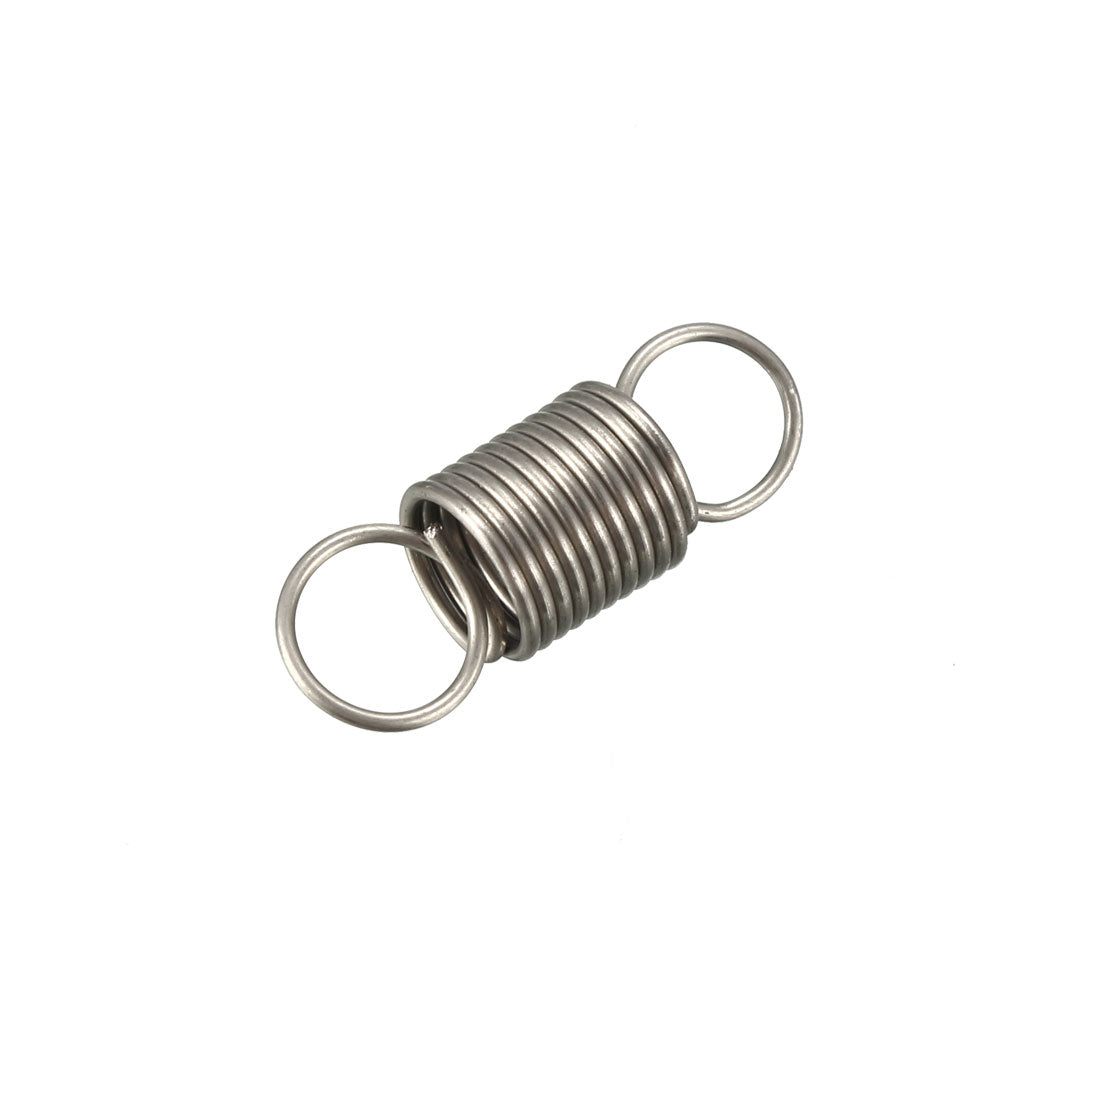 uxcell Uxcell Extended Tension Spring Wire Diameter 0.02", OD 0.2", Free Length 0.59" 10pcs